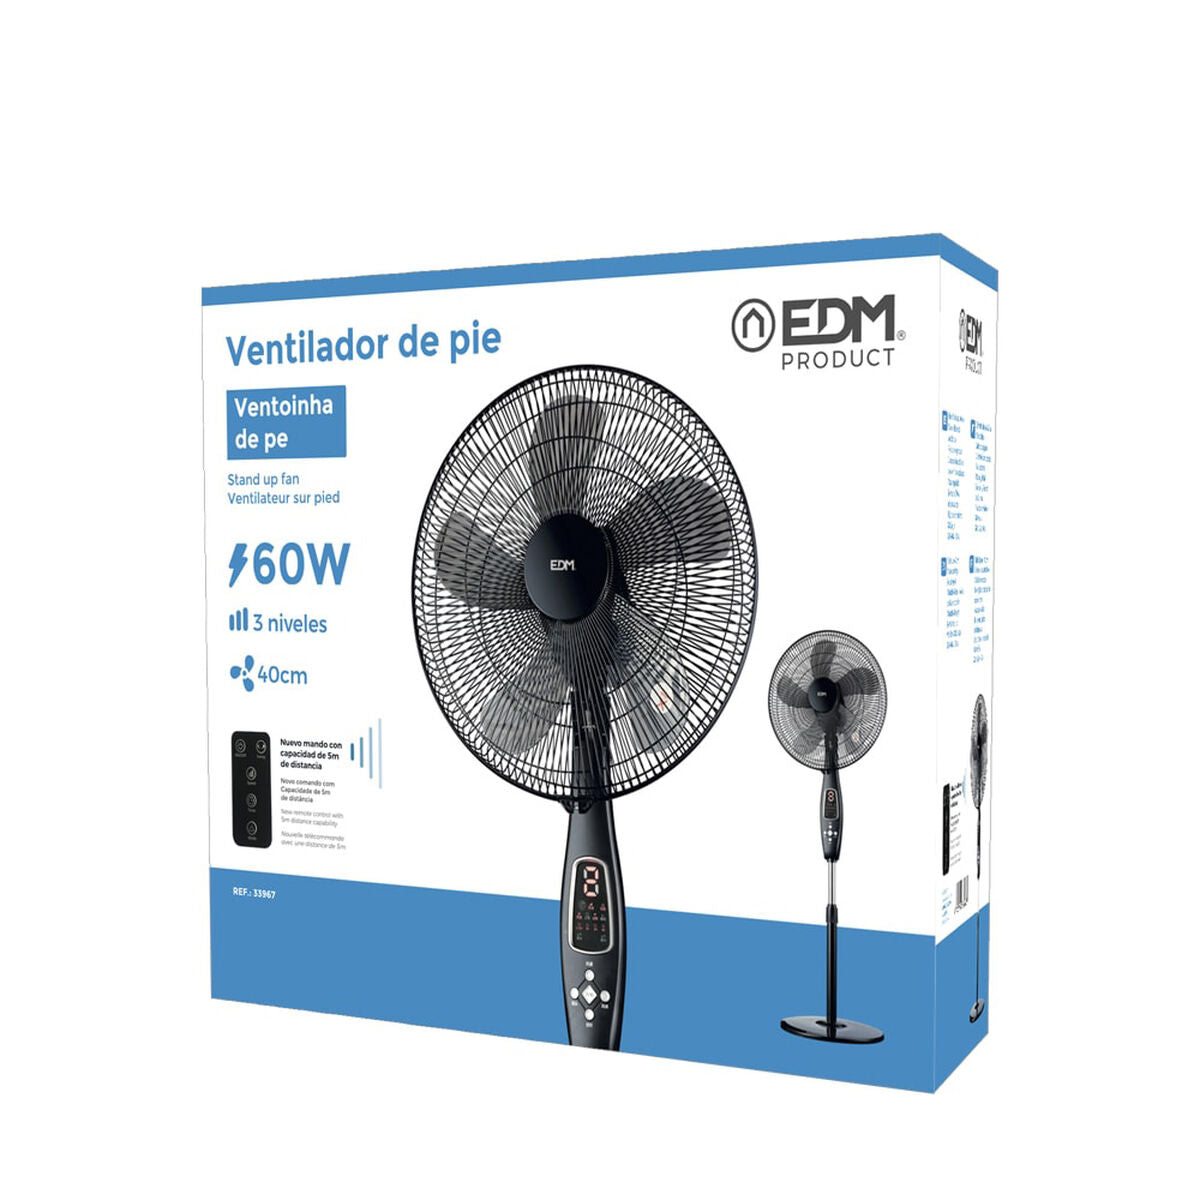 Freestanding Fan EDM Black 60 W, EDM, Home and cooking, Portable air conditioning, freestanding-fan-edm-black-60-w, Brand_EDM, category-reference-2399, category-reference-2450, category-reference-2451, category-reference-t-19656, category-reference-t-21087, category-reference-t-25217, Condition_NEW, ferretería, Price_50 - 100, summer, RiotNook